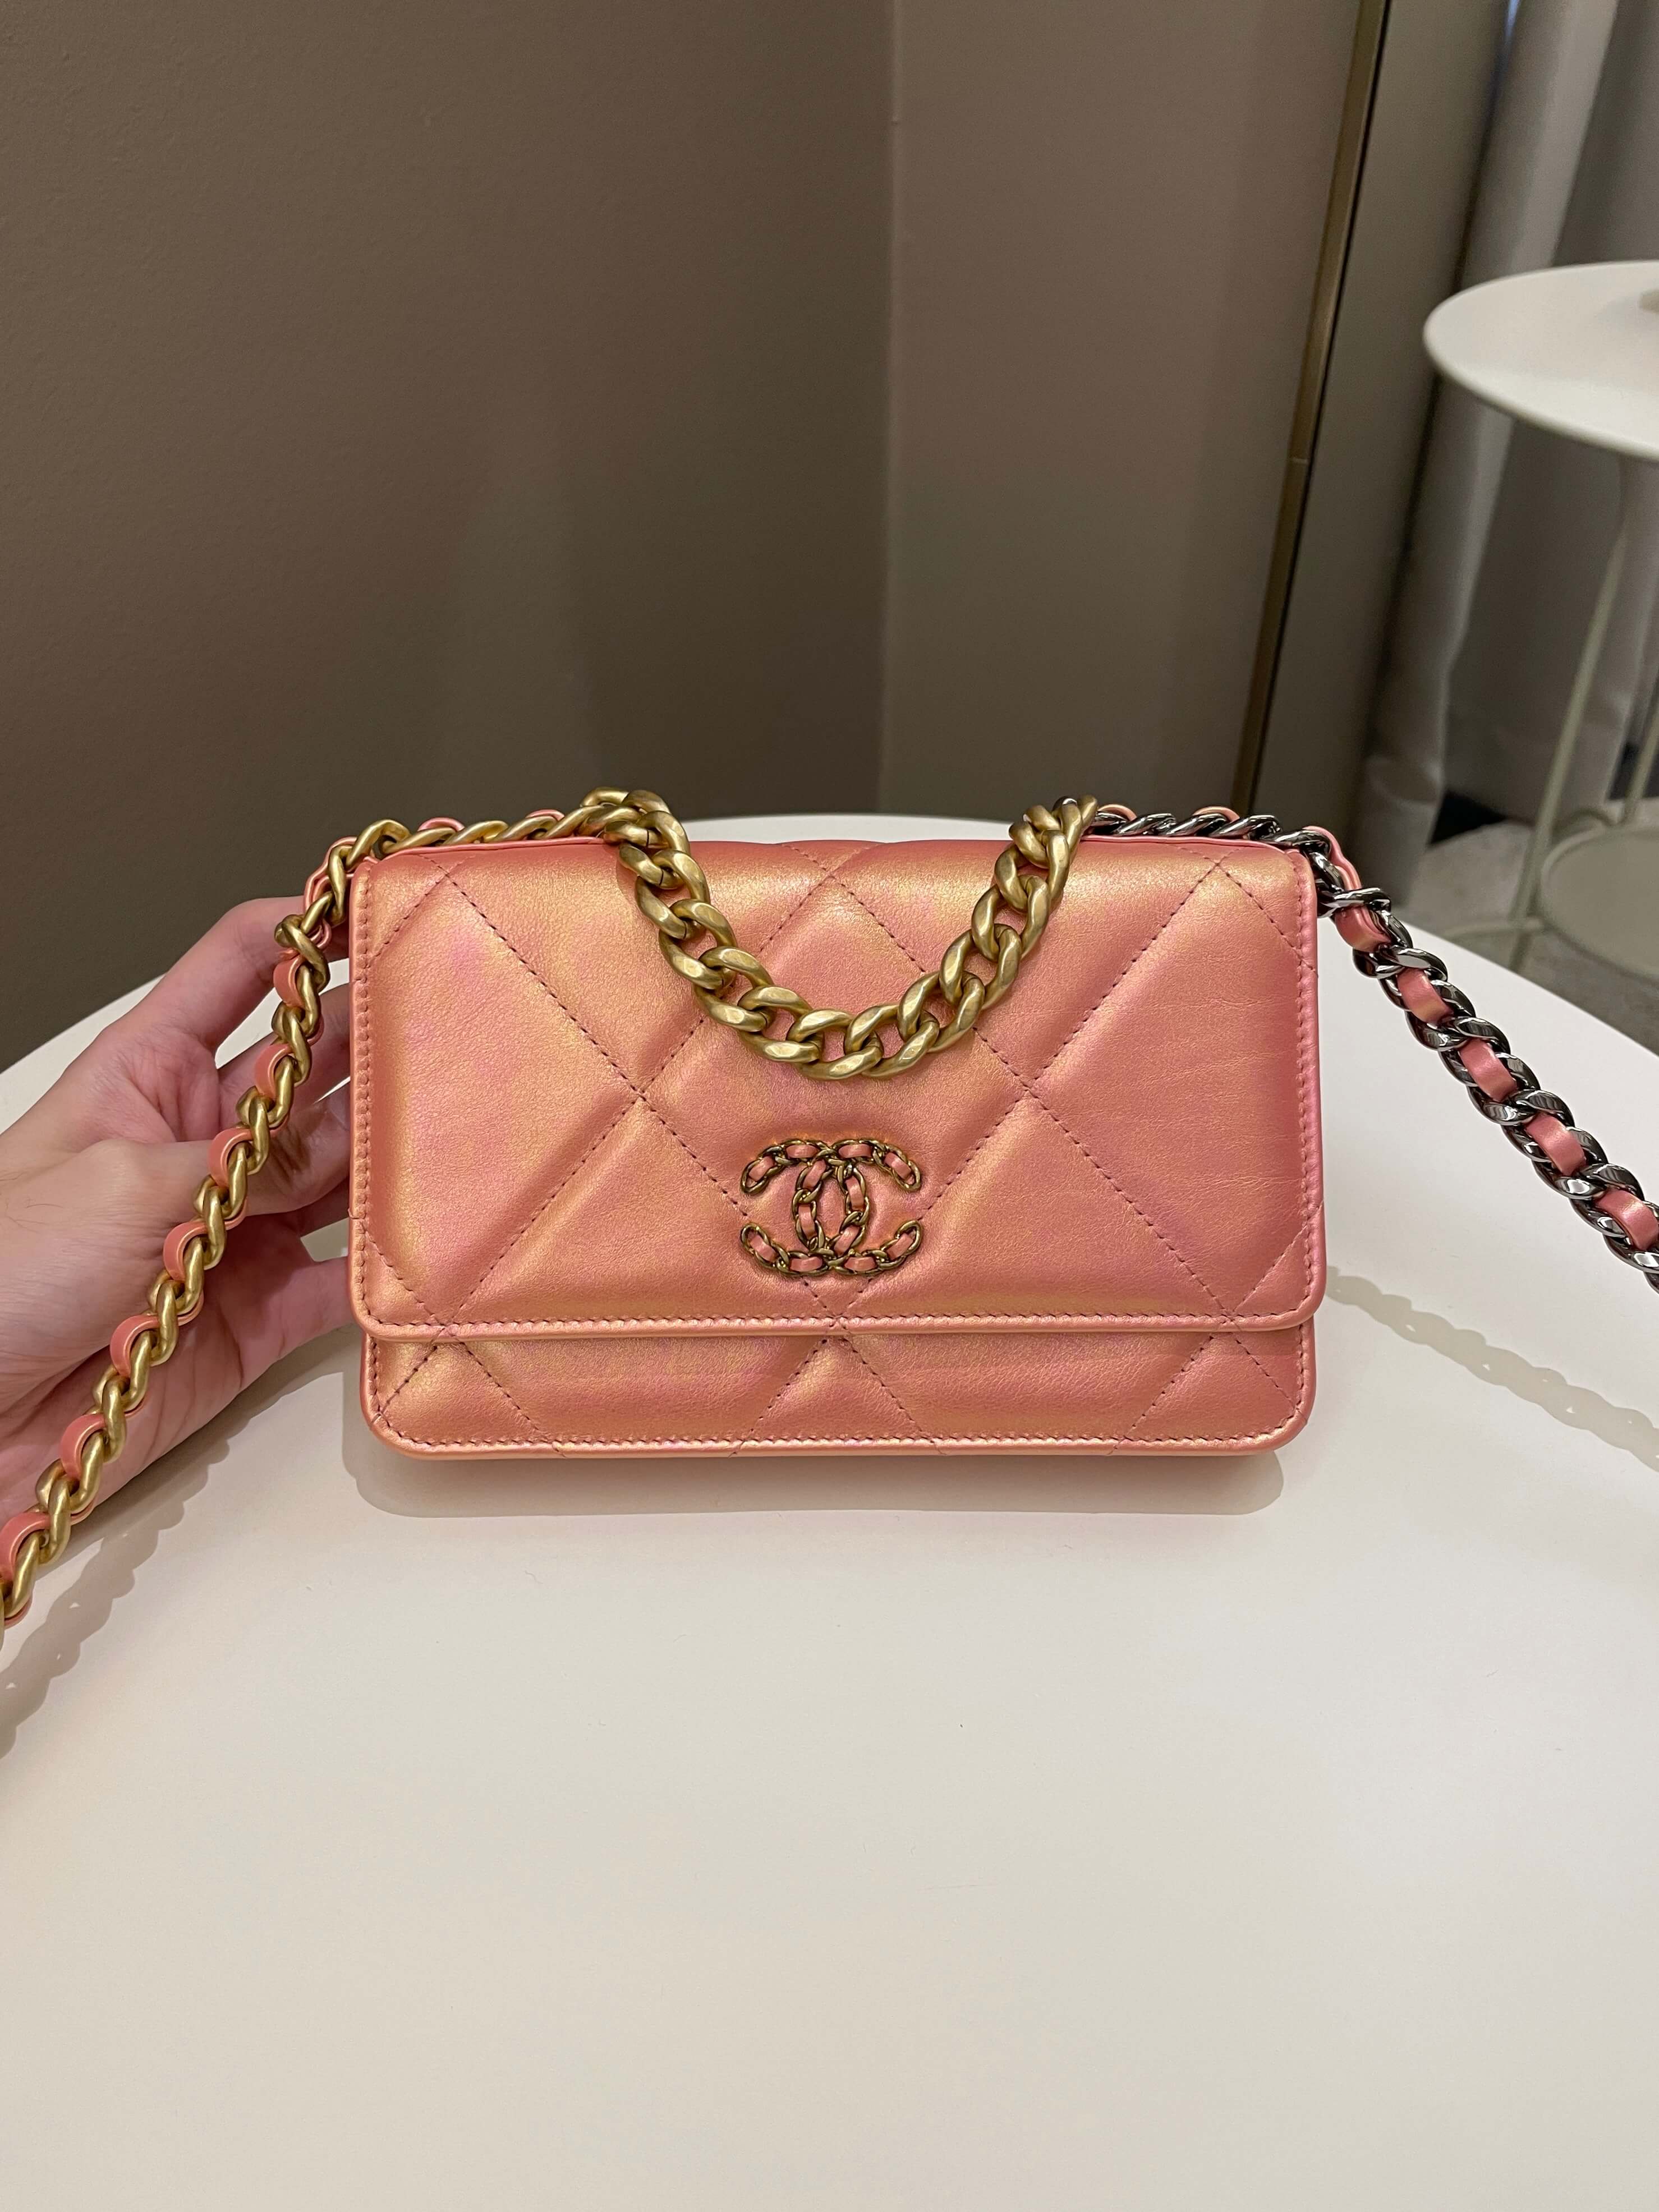 Chanel 19 Wallet On Chain Coral Iridescent – ＬＯＶＥＬＯＴＳＬＵＸＵＲＹ